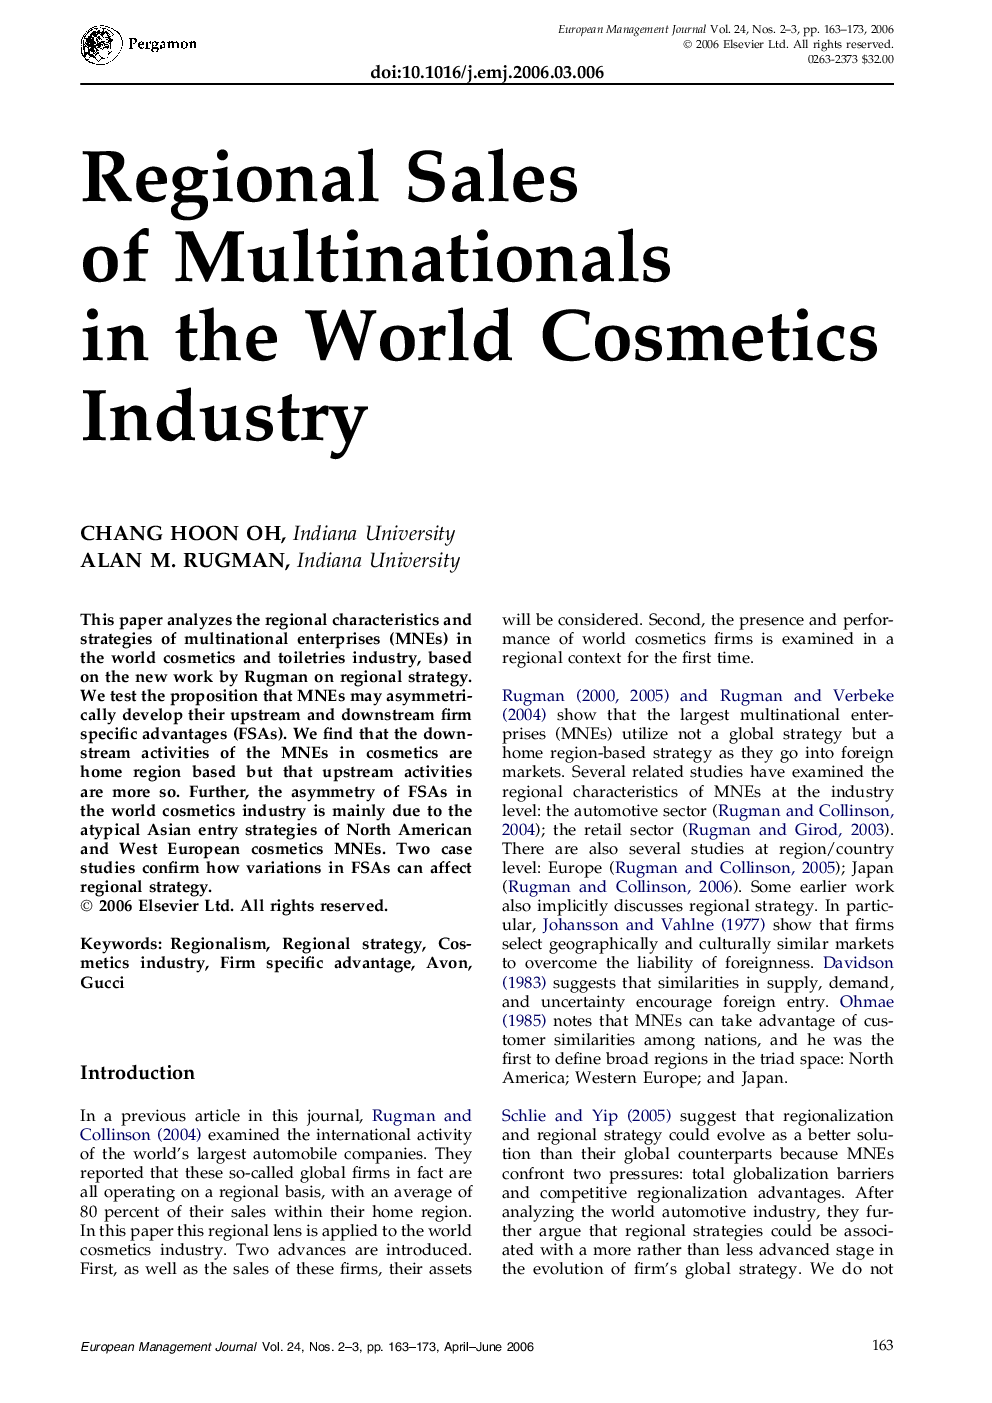 Regional Sales of Multinationals in the World Cosmetics Industry